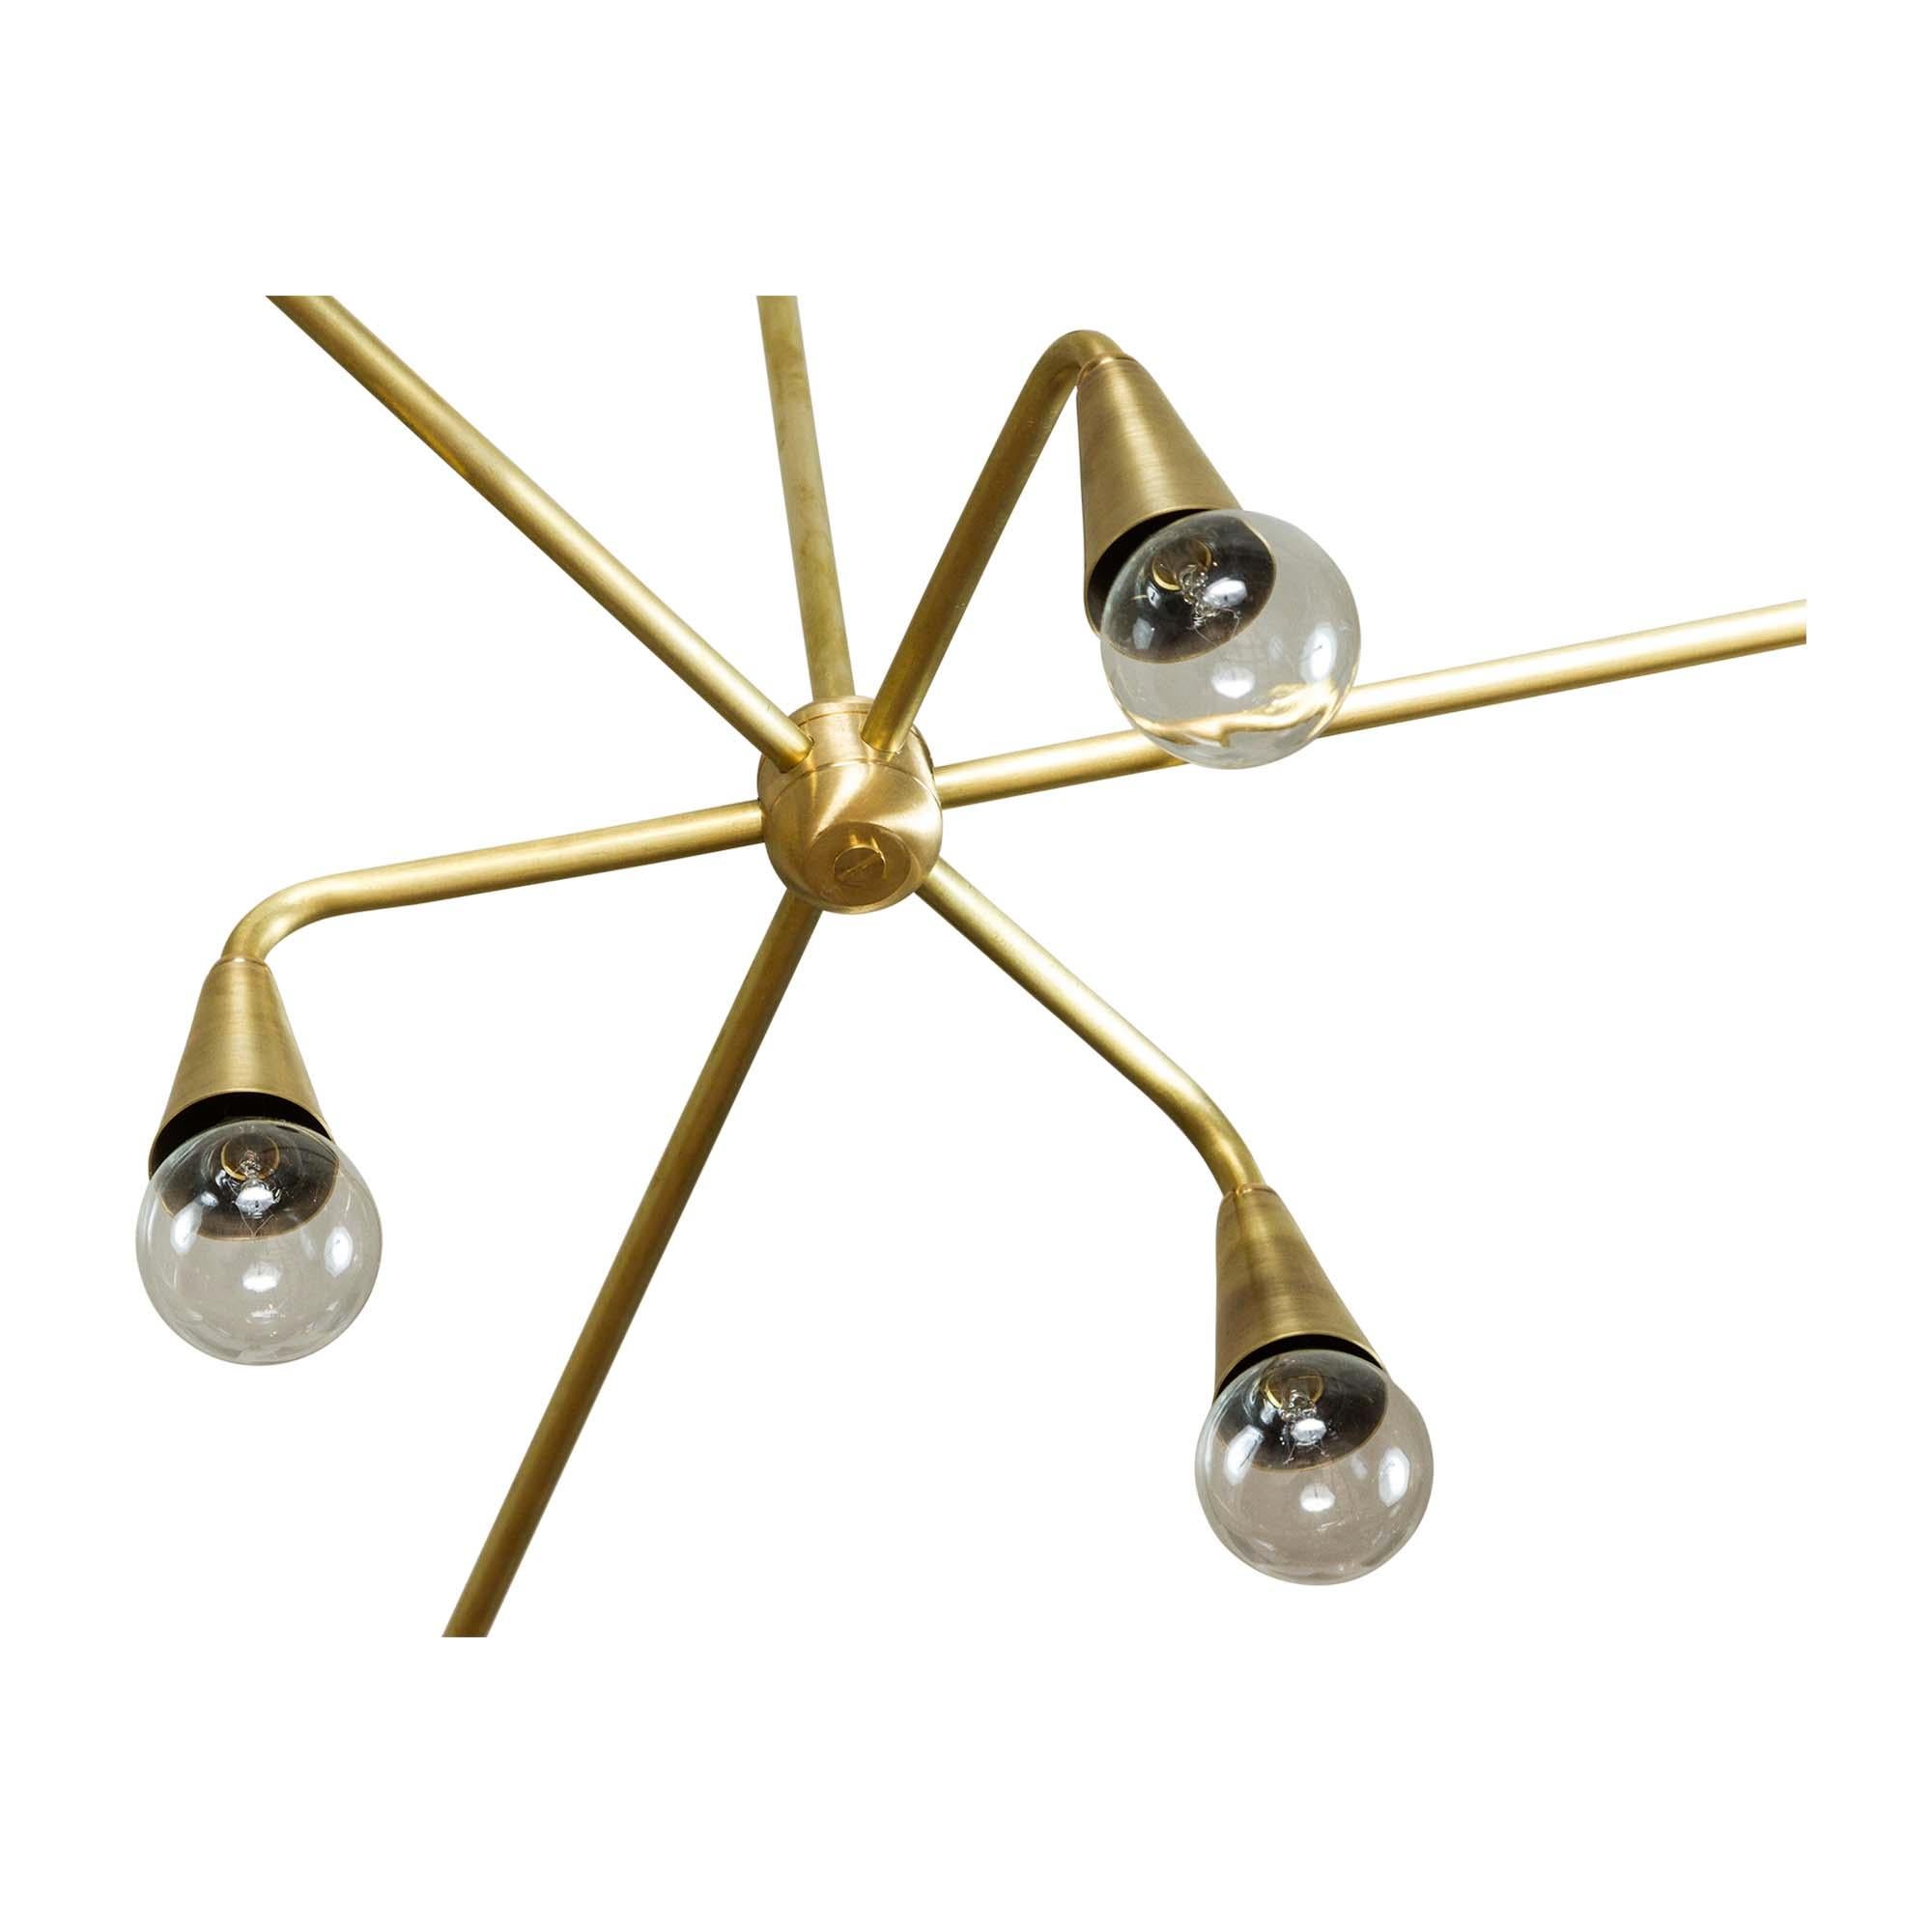 The 6-globe chandelier features six arms that are centered on a brass rod. Three of the globes are angled down with brass shades. The other three have white or black powdercoated shades.

The Lawson-Fenning Collection is designed and handmade in